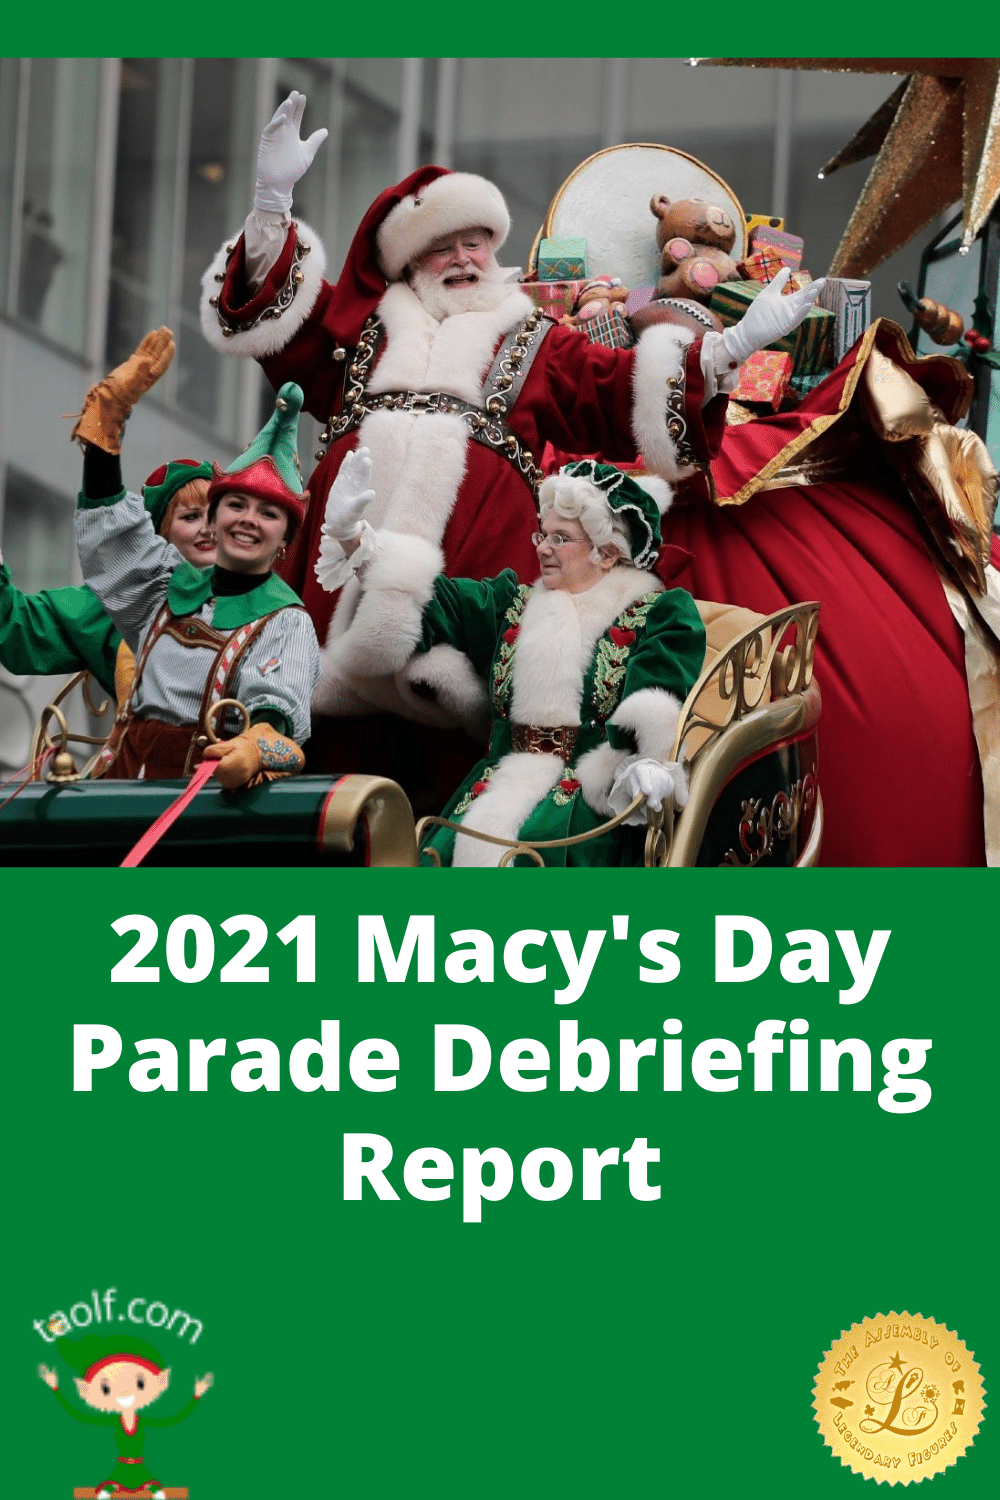 2021 Macy's Day Parade Debriefing Report